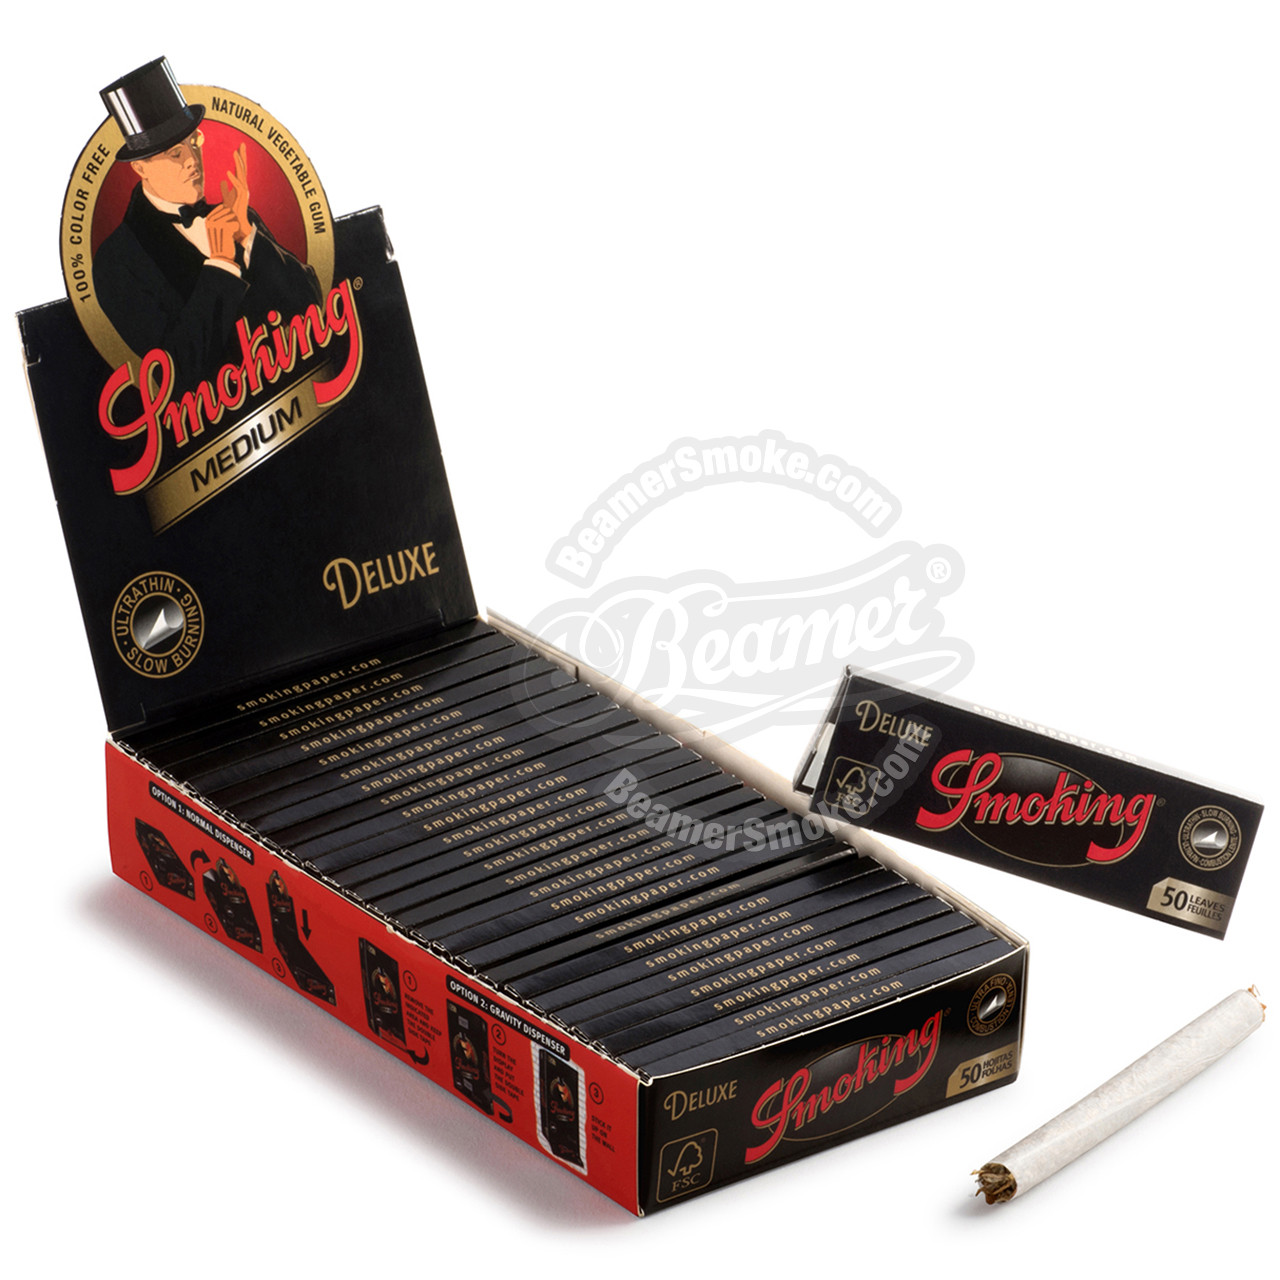 Details about   Smoking Deluxe Rolling Papers 2 x Full Box 100 Booklets Regular Size 6000 Sheets 